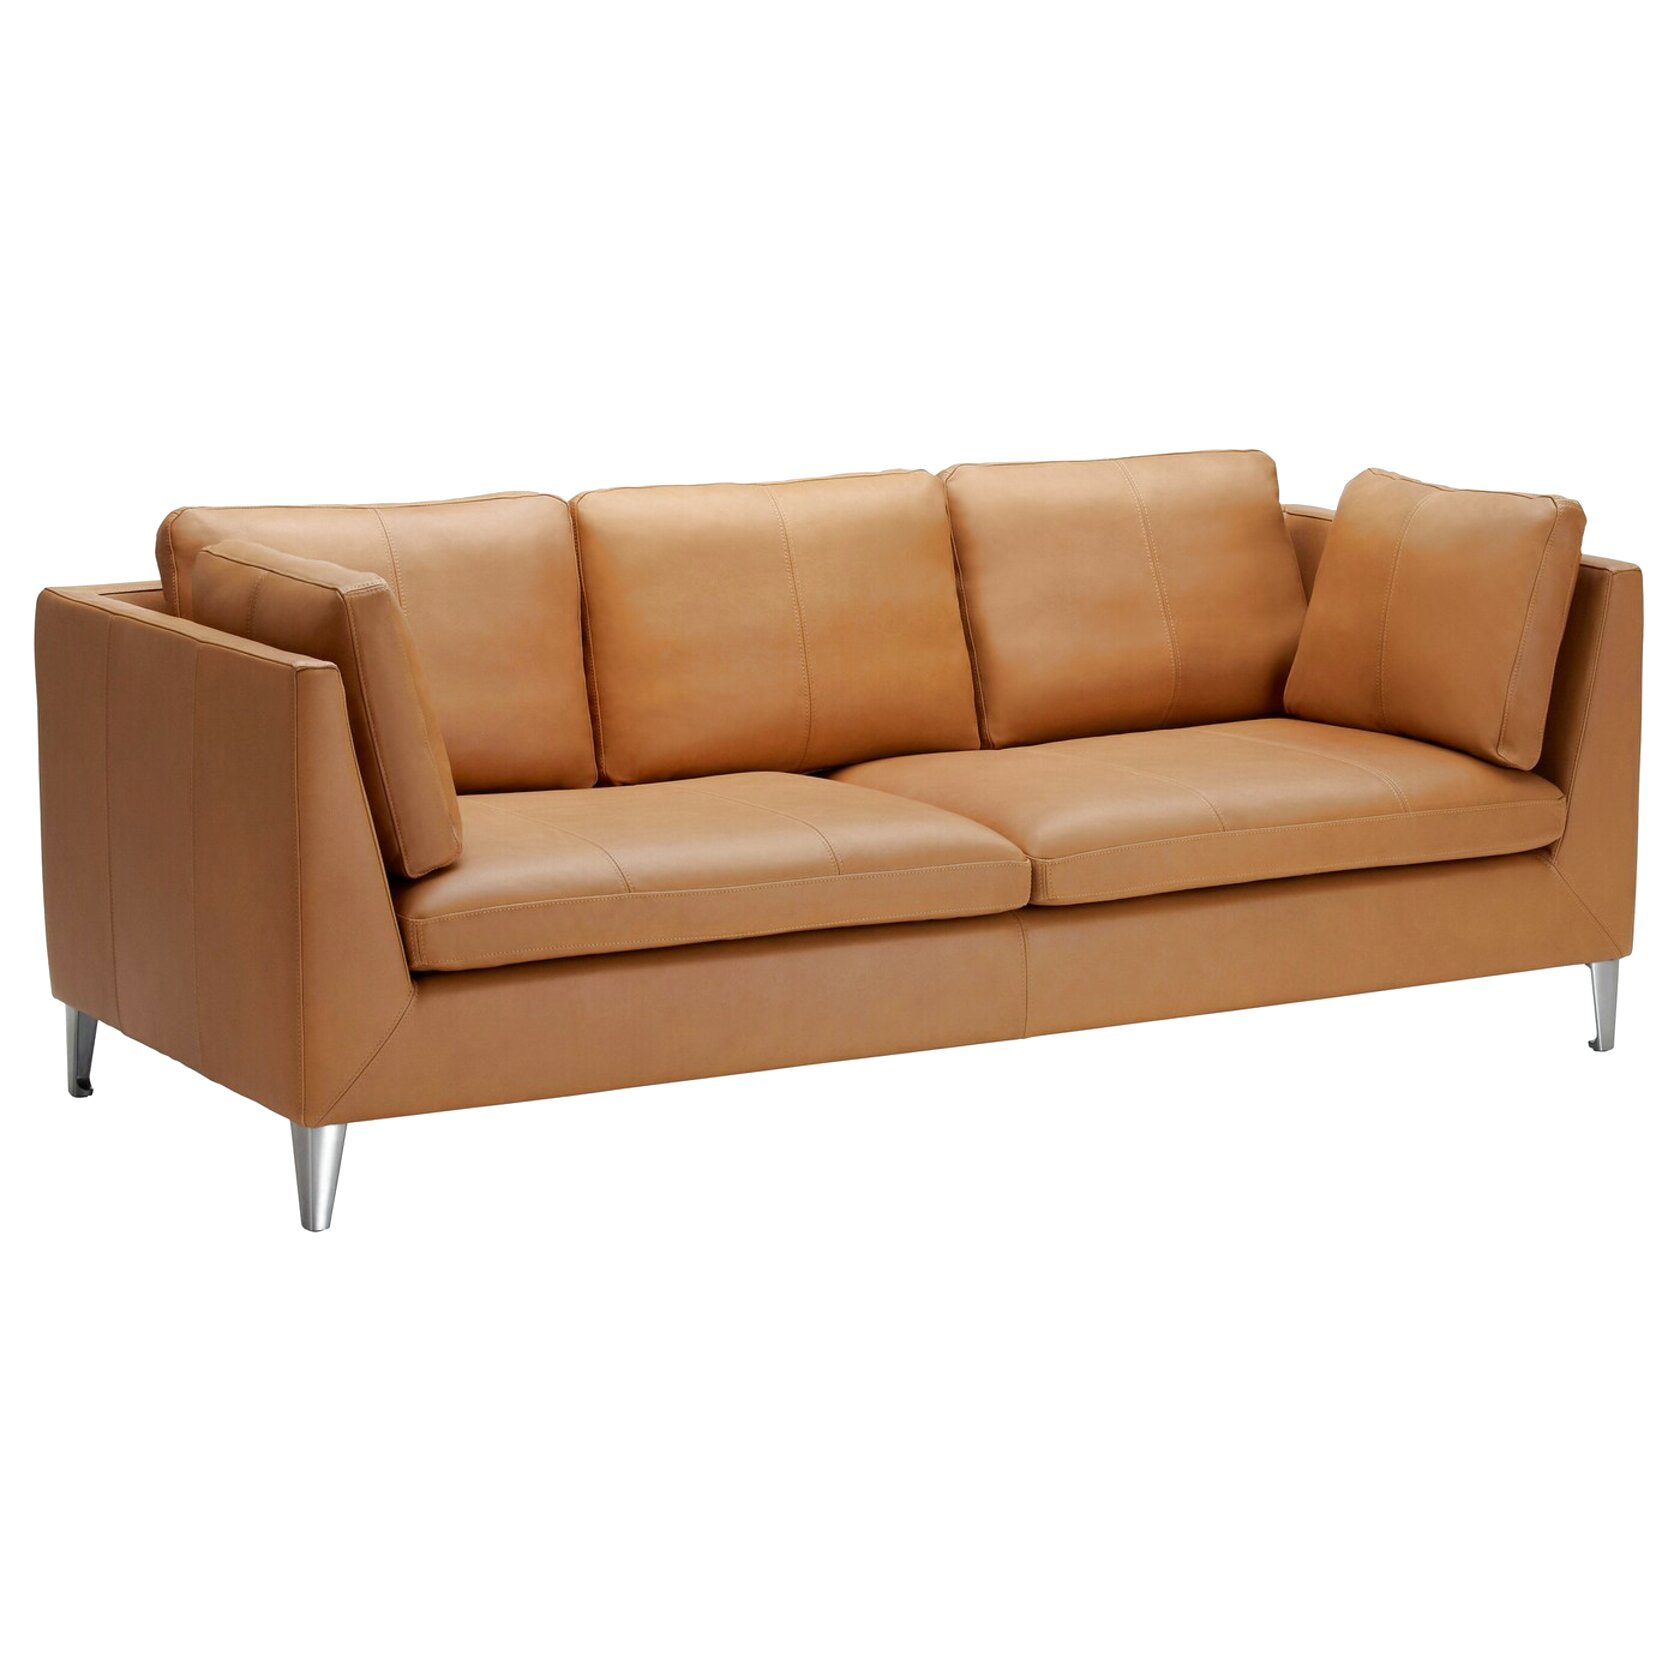  Ikea  Leather  Sofa  for sale in UK View 59 bargains